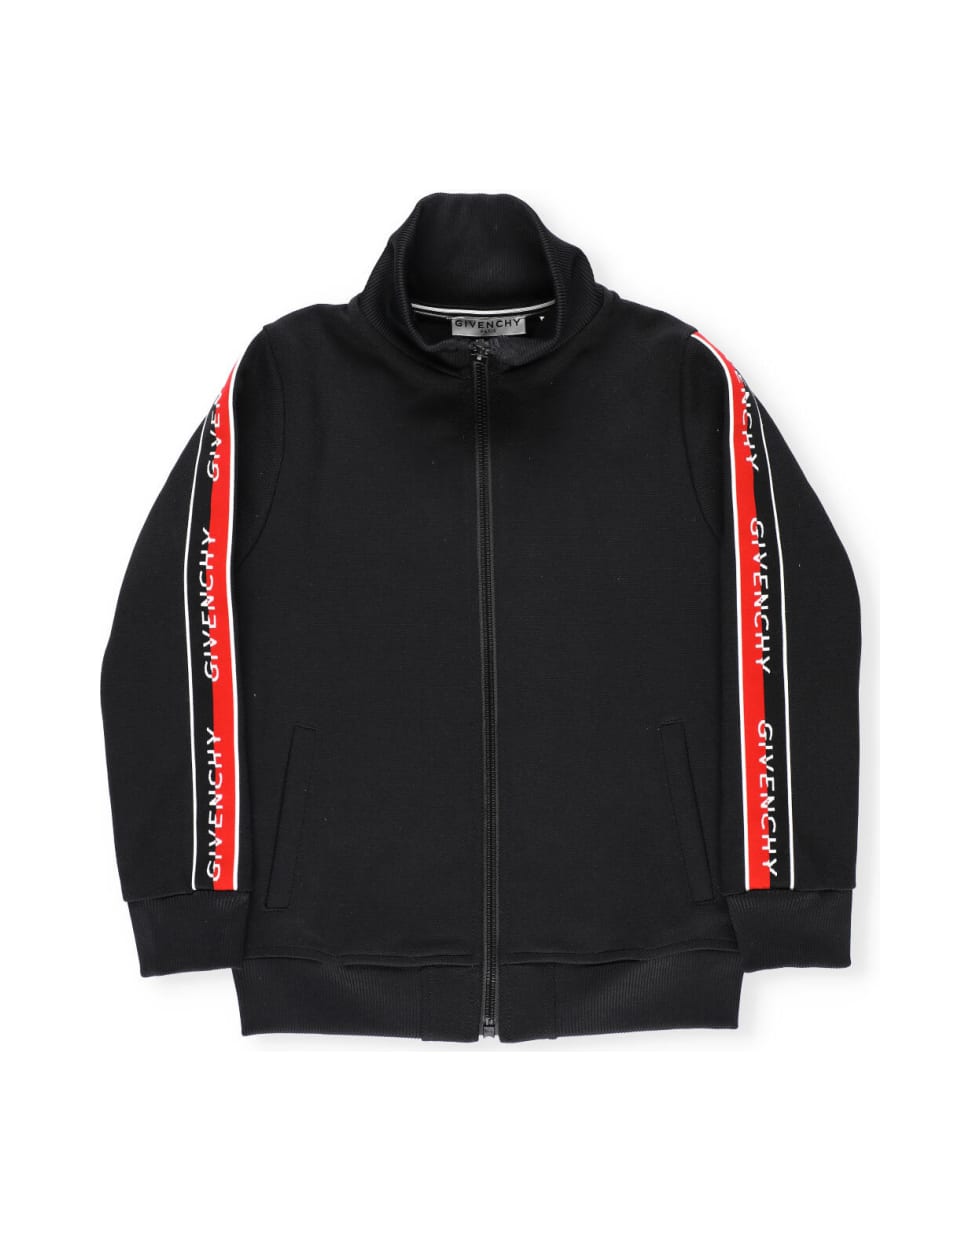 Givenchy Sweatshirt With Loged Band - Black